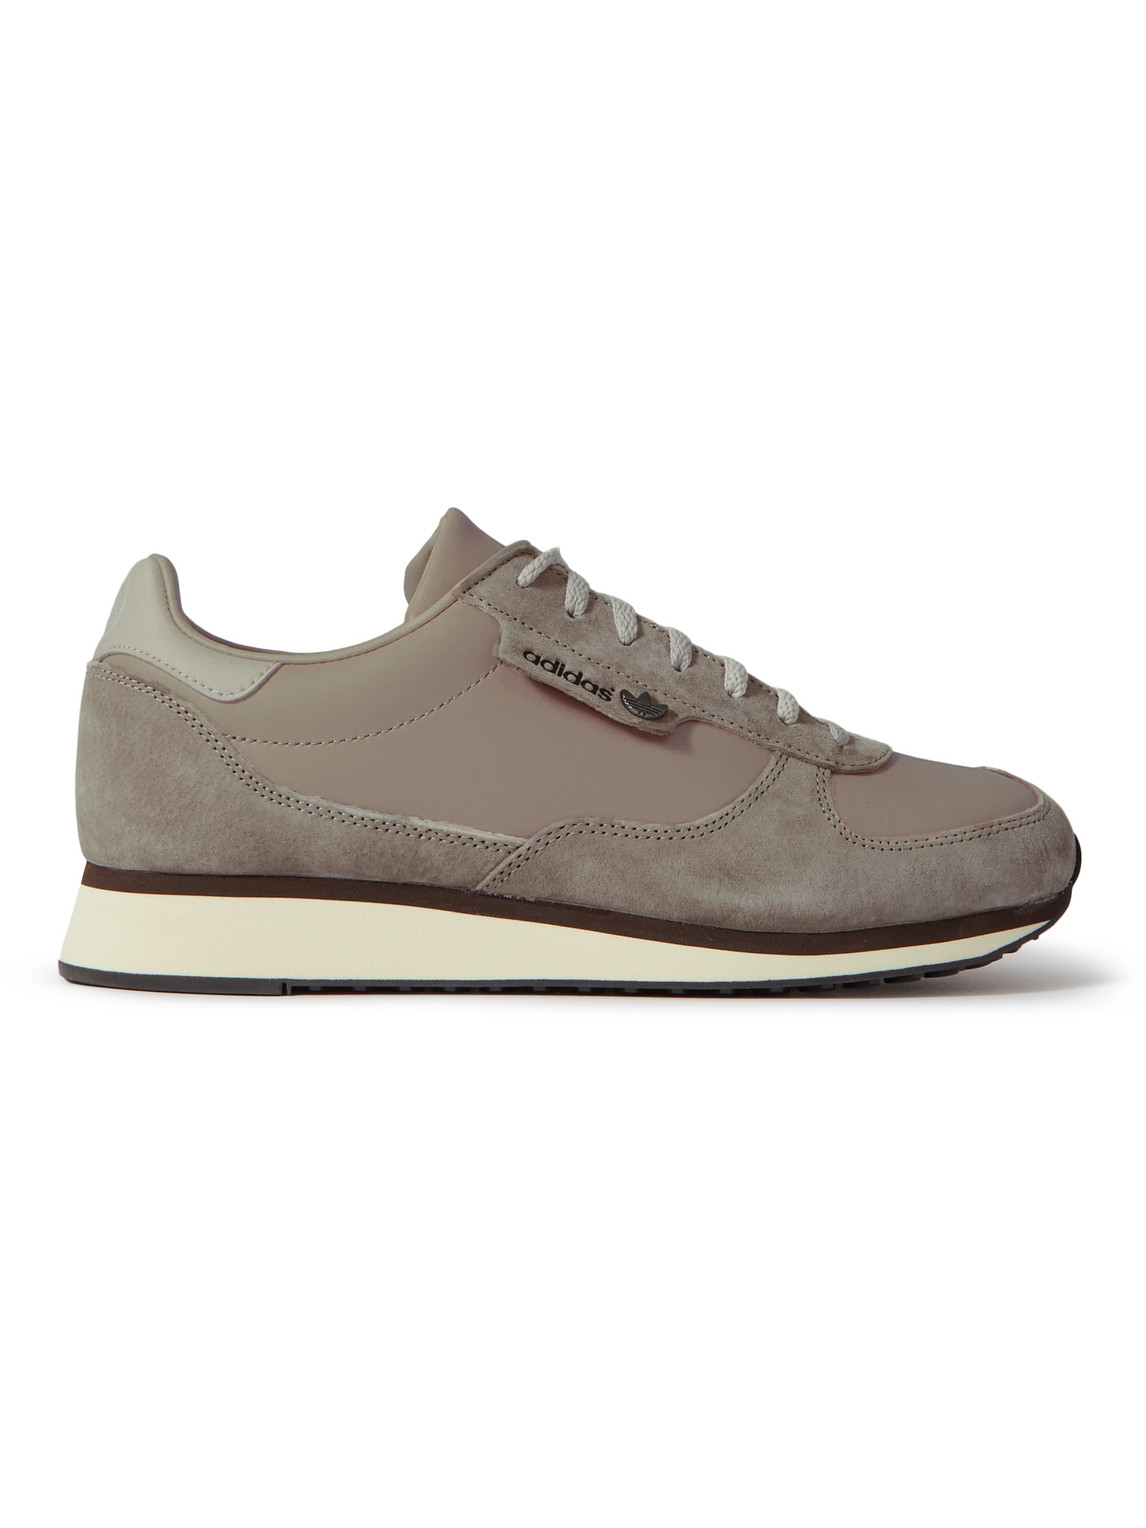 Adidas Consortium Lawkholme Spzl Leather And Suede Trainers In Neutral